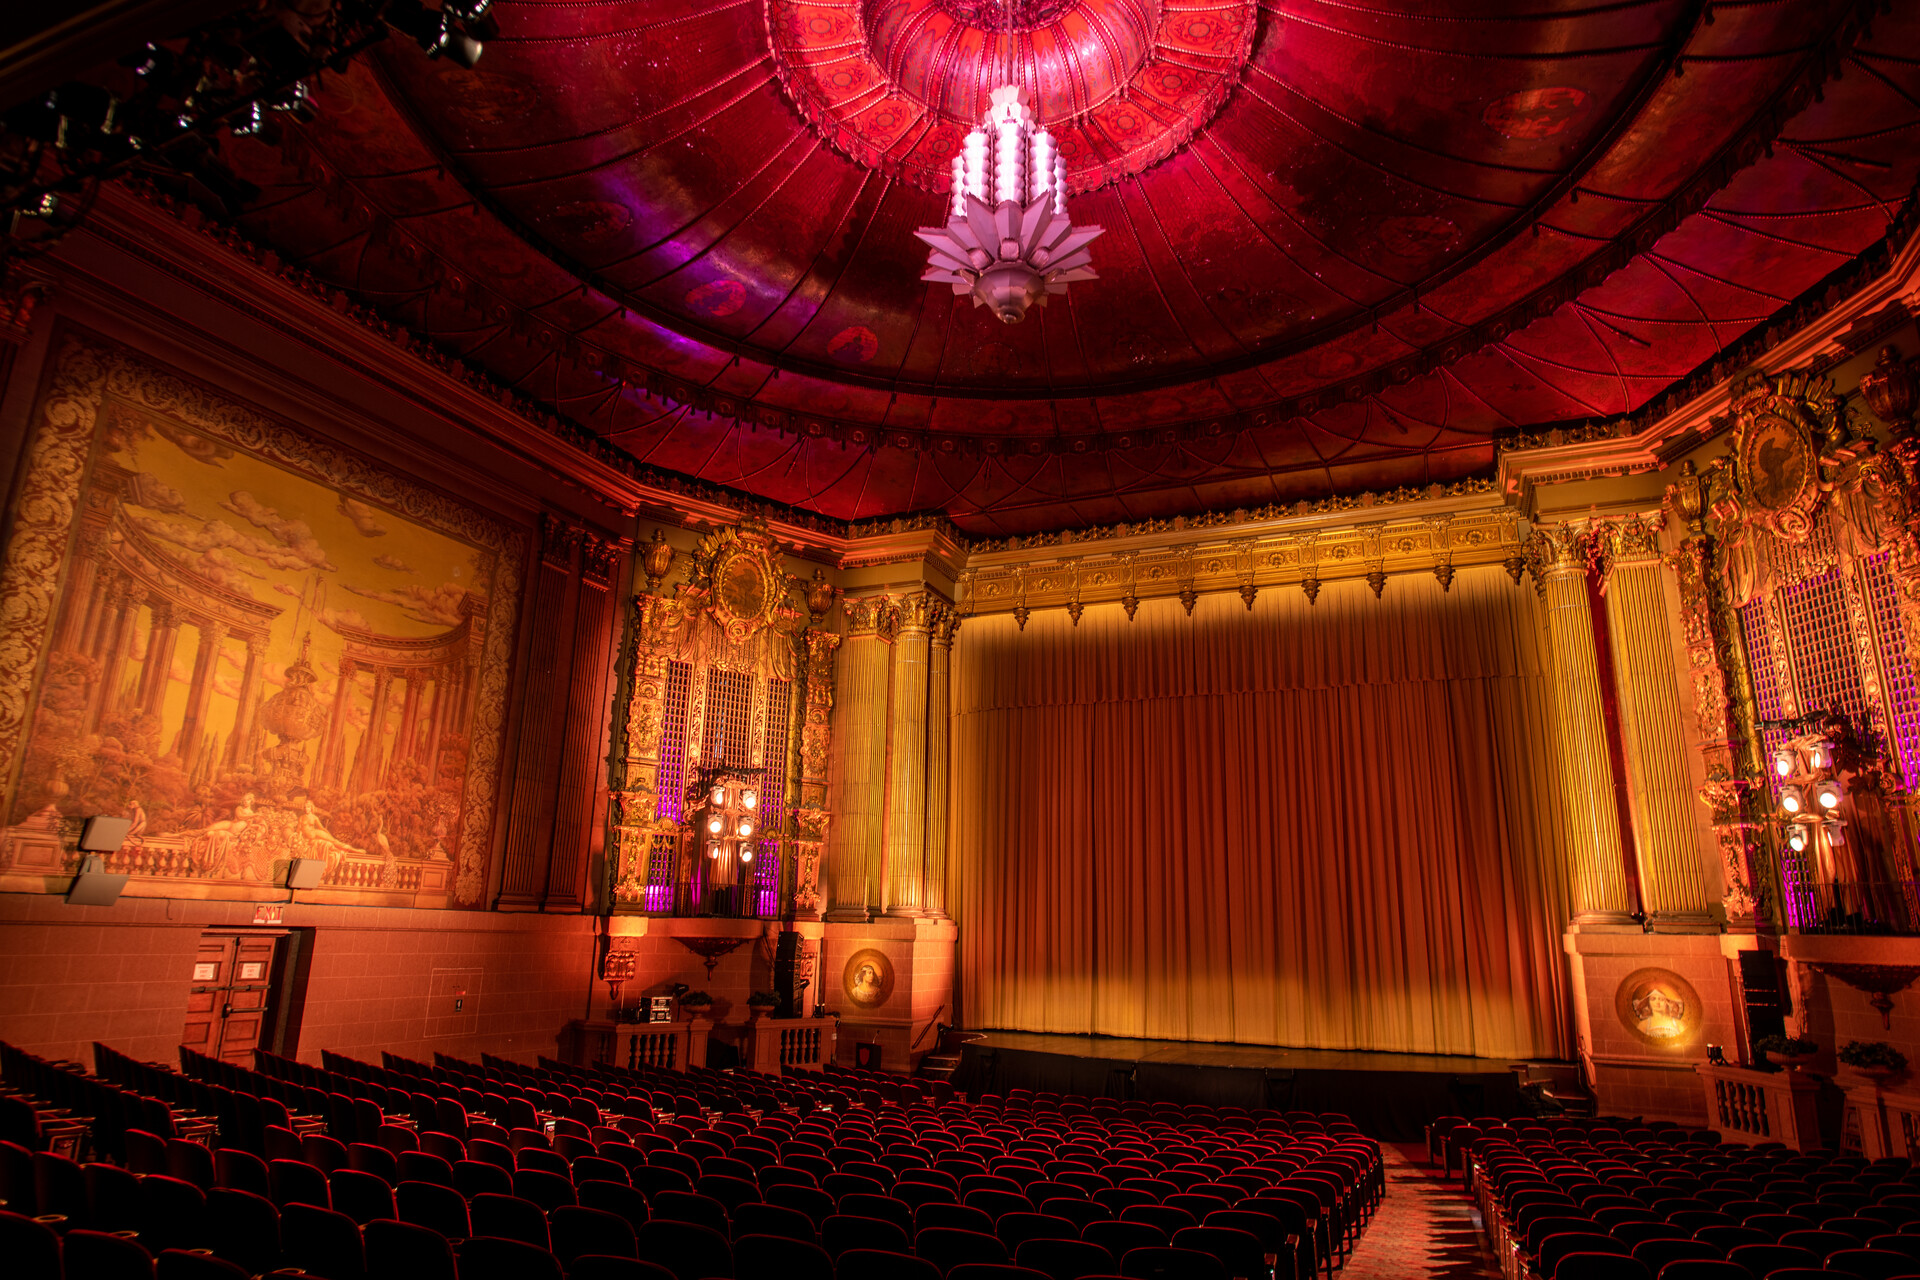 An ornate theater interior in the Art Deco style, bathed in warm tones of red and gold. The photograph is taken from the back of the theater, facing the stage and its gold draped curtain.